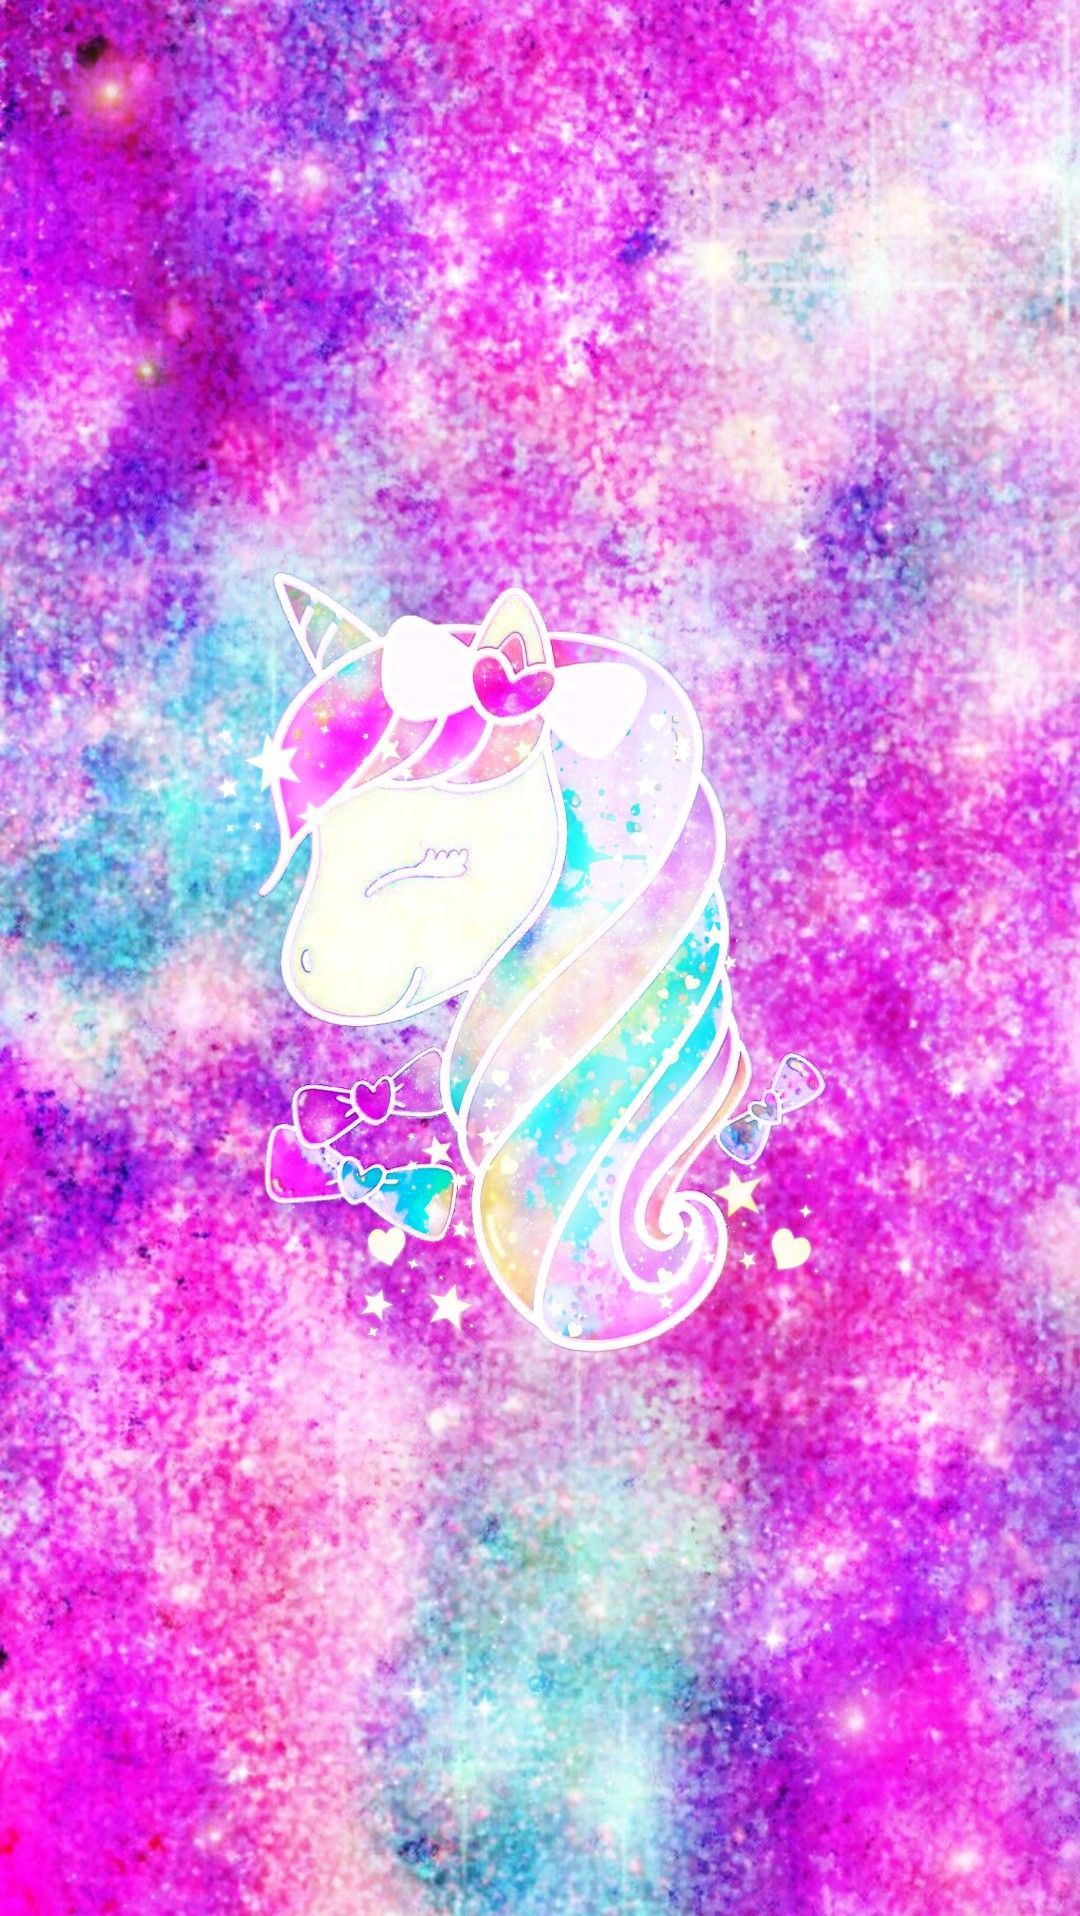 Unicorn Cute Wallpapers Wallpaper Cave When you boot your computer, there is an initial screen that comes up, in they add glamor to your computer and make it look aesthetically appealing and highly presentable. unicorn cute wallpapers wallpaper cave